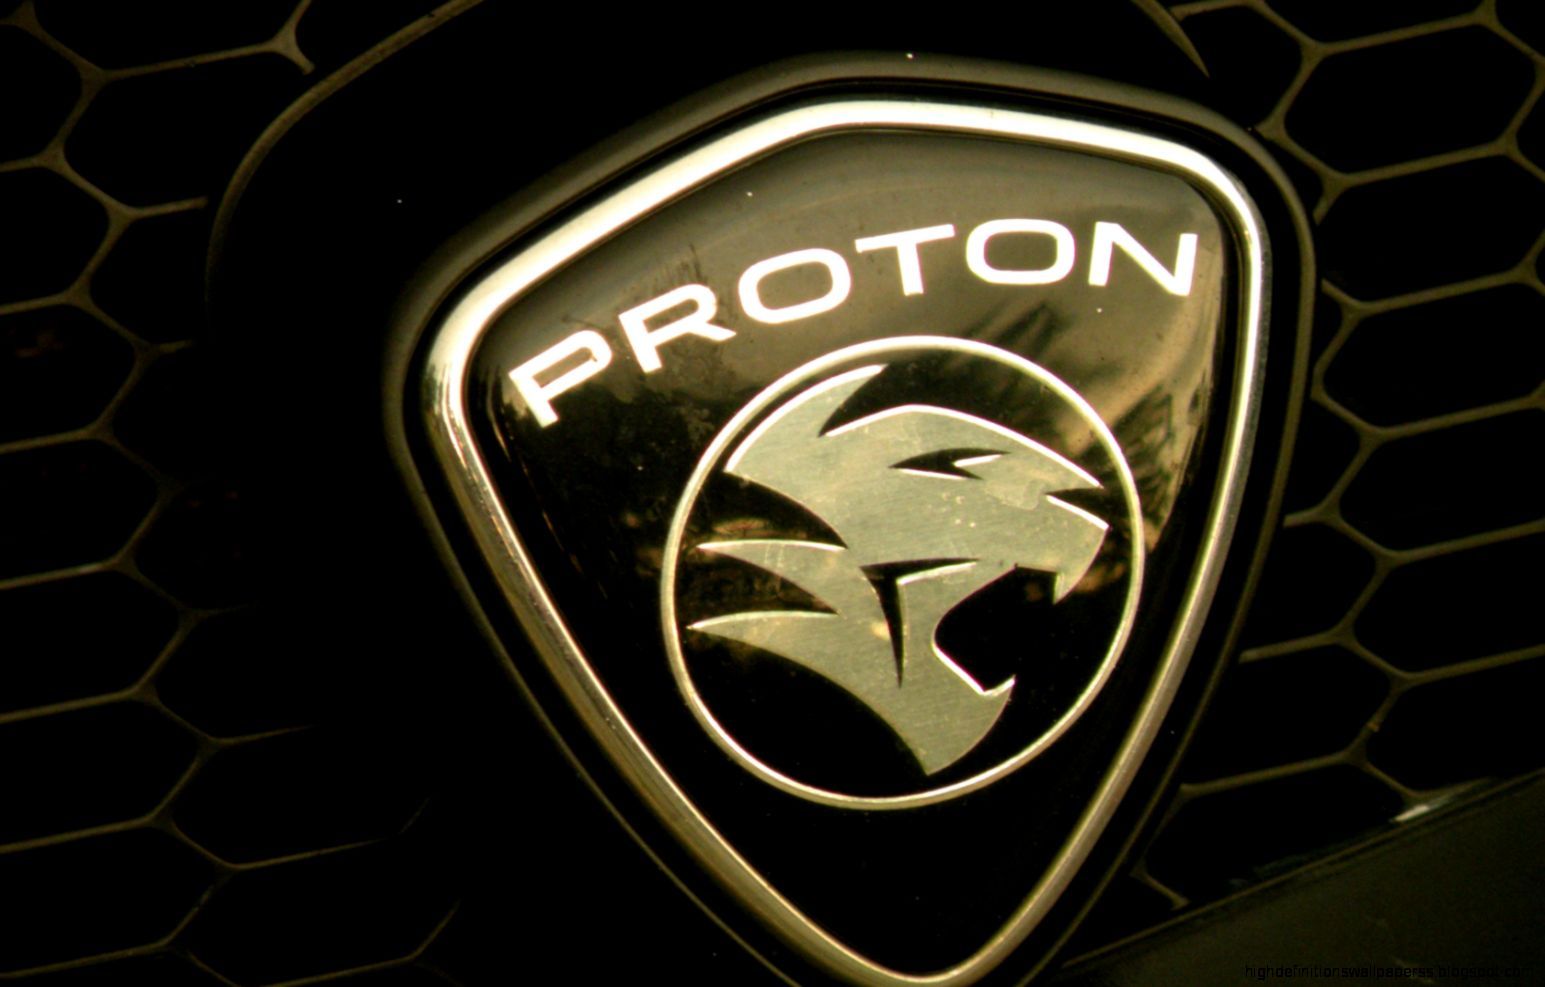 Proton Persona Wallpaper HD Photo, Wallpaper and other Image